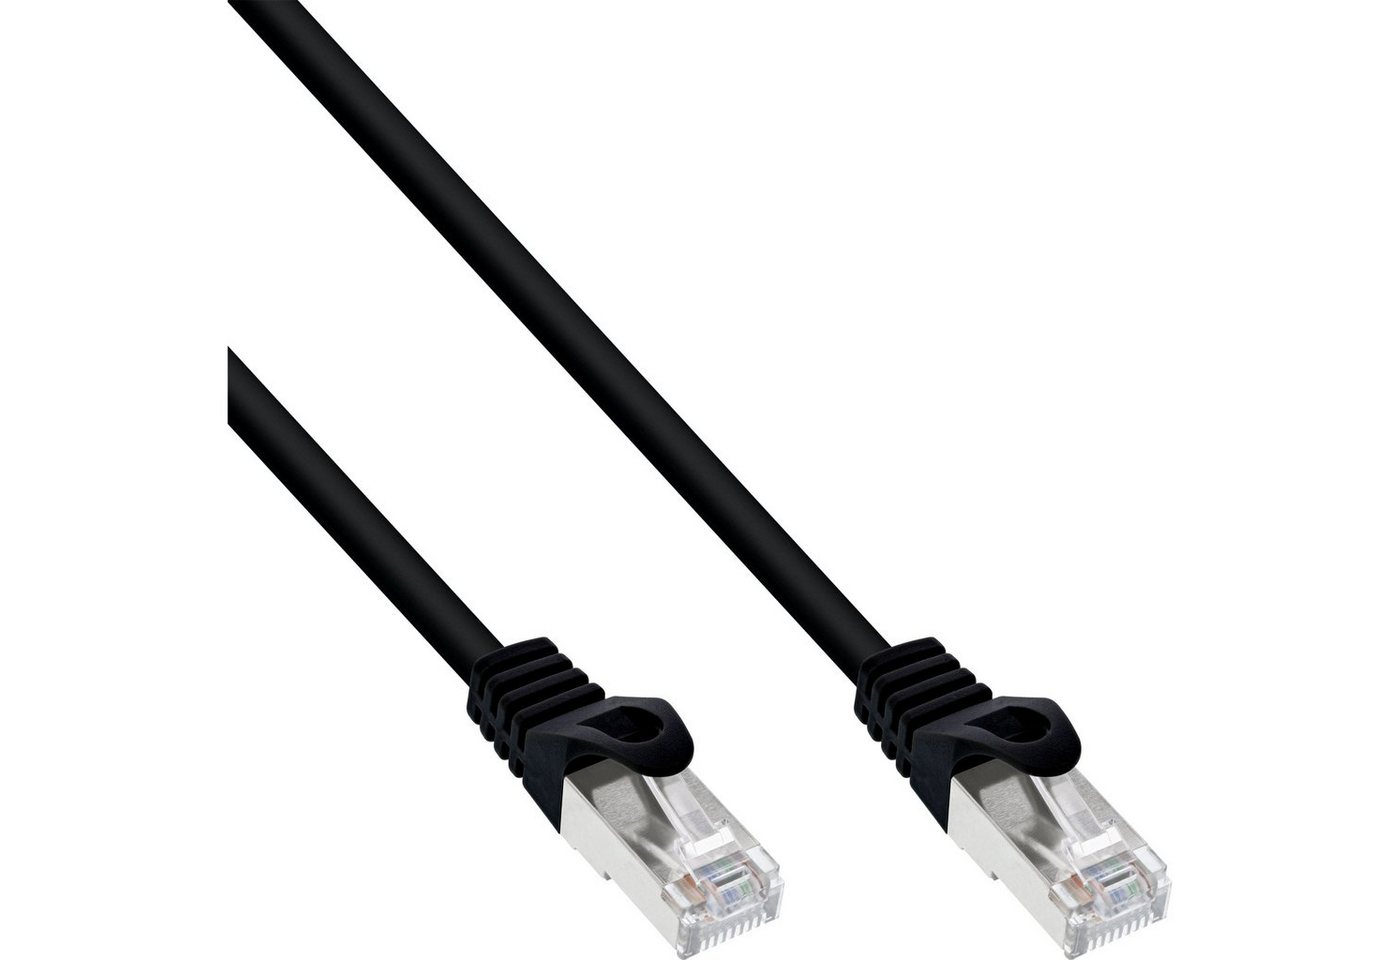 INTOS ELECTRONIC AG InLine® Patchkabel, SF/UTP, Cat.5e, schwarz, 5m LAN-Kabel von INTOS ELECTRONIC AG